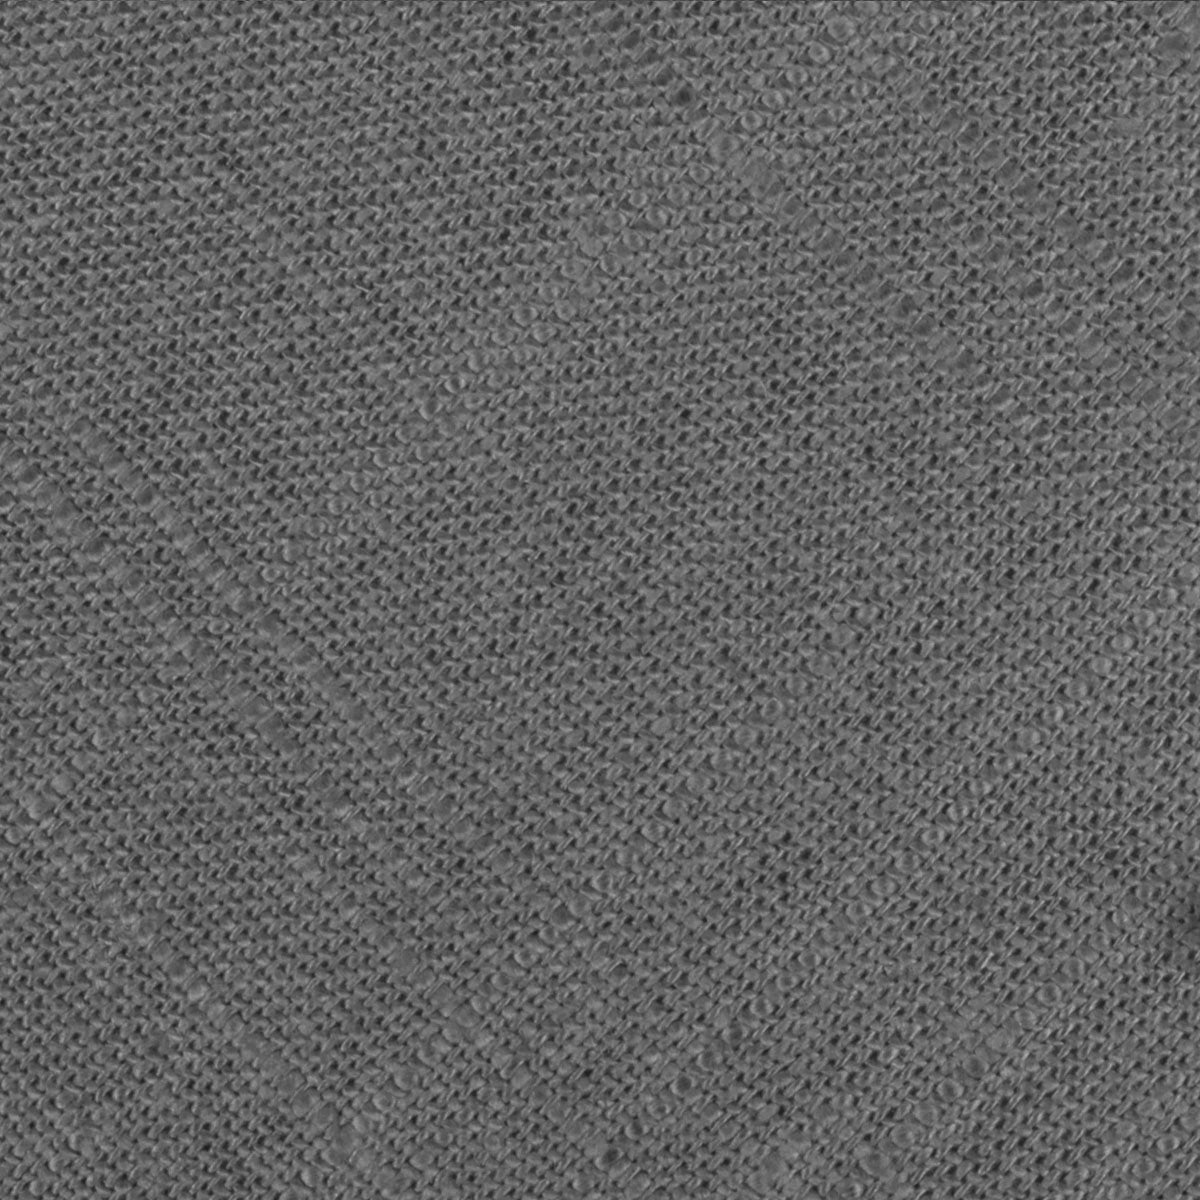 Pewter Grey Linen Pocket Square Fabric